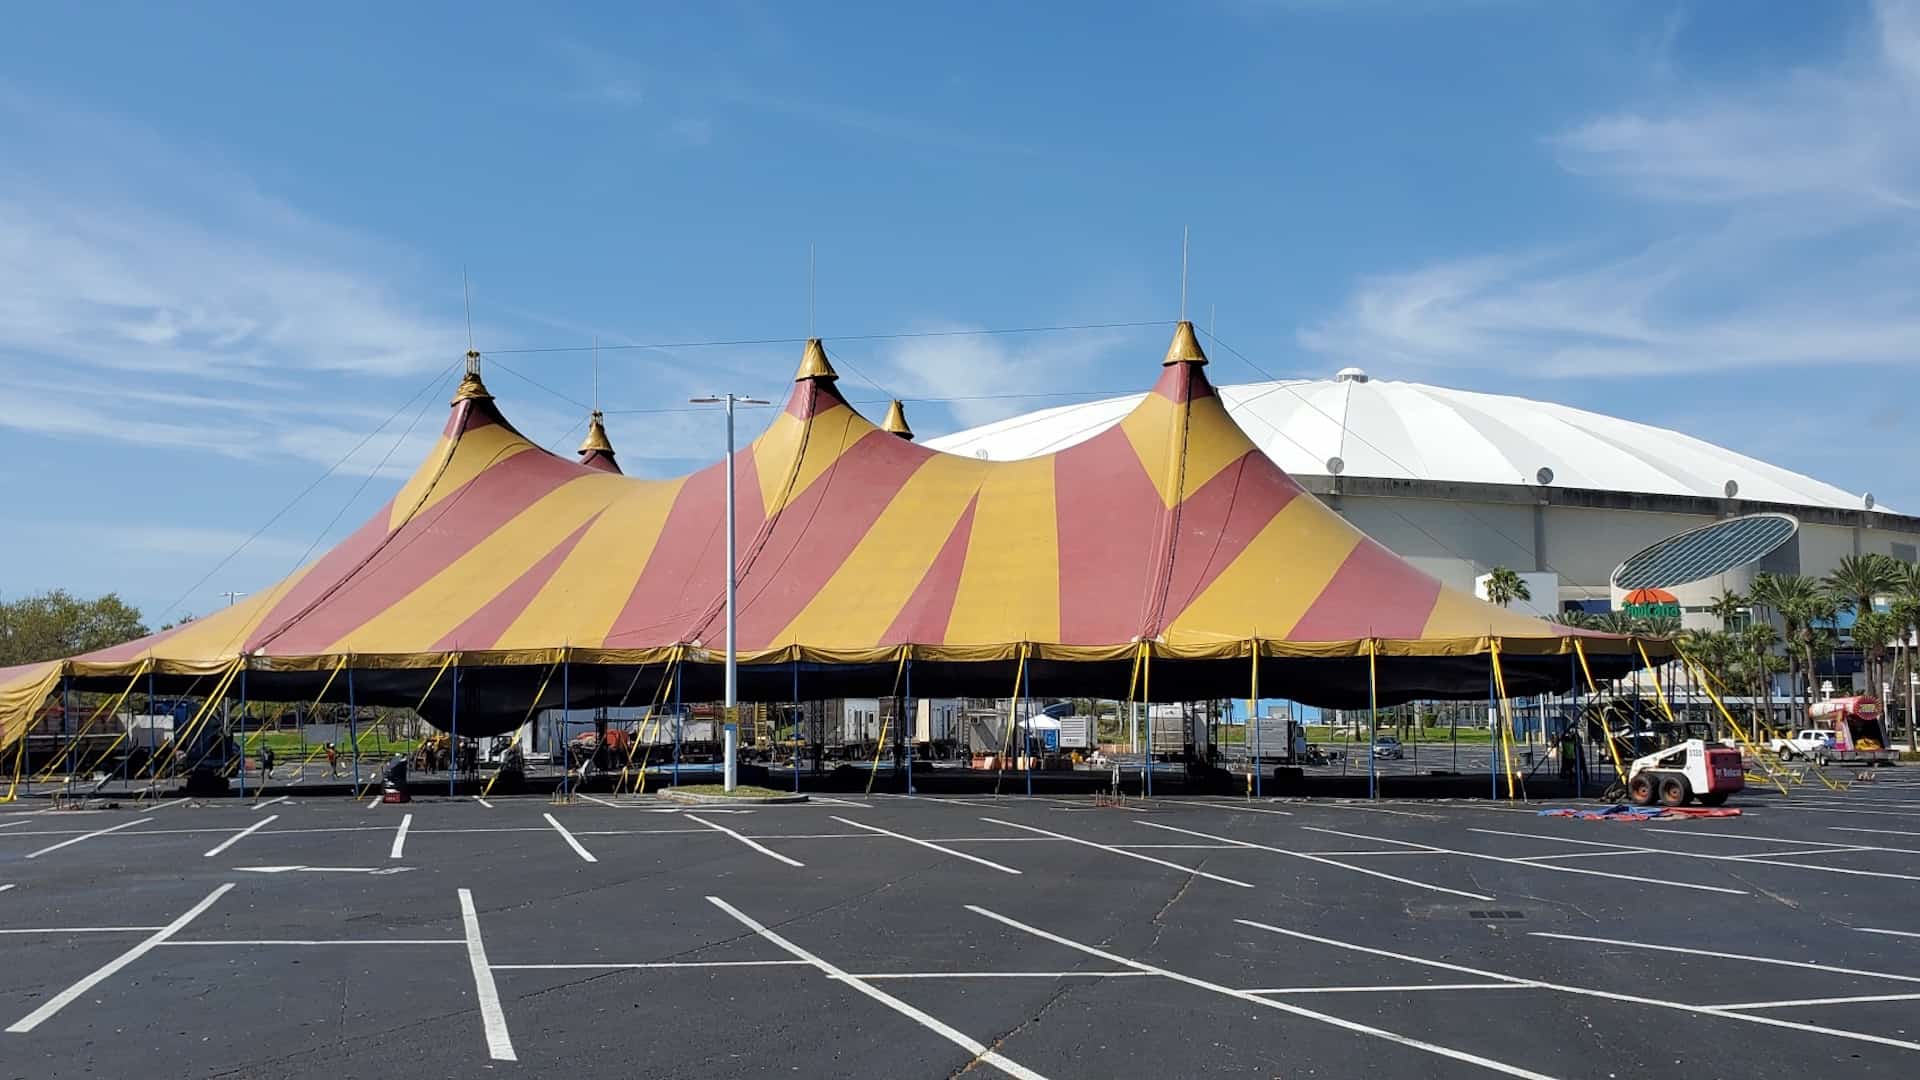 Garden Bros Circus is taking place in the Tropicana Field parking lot